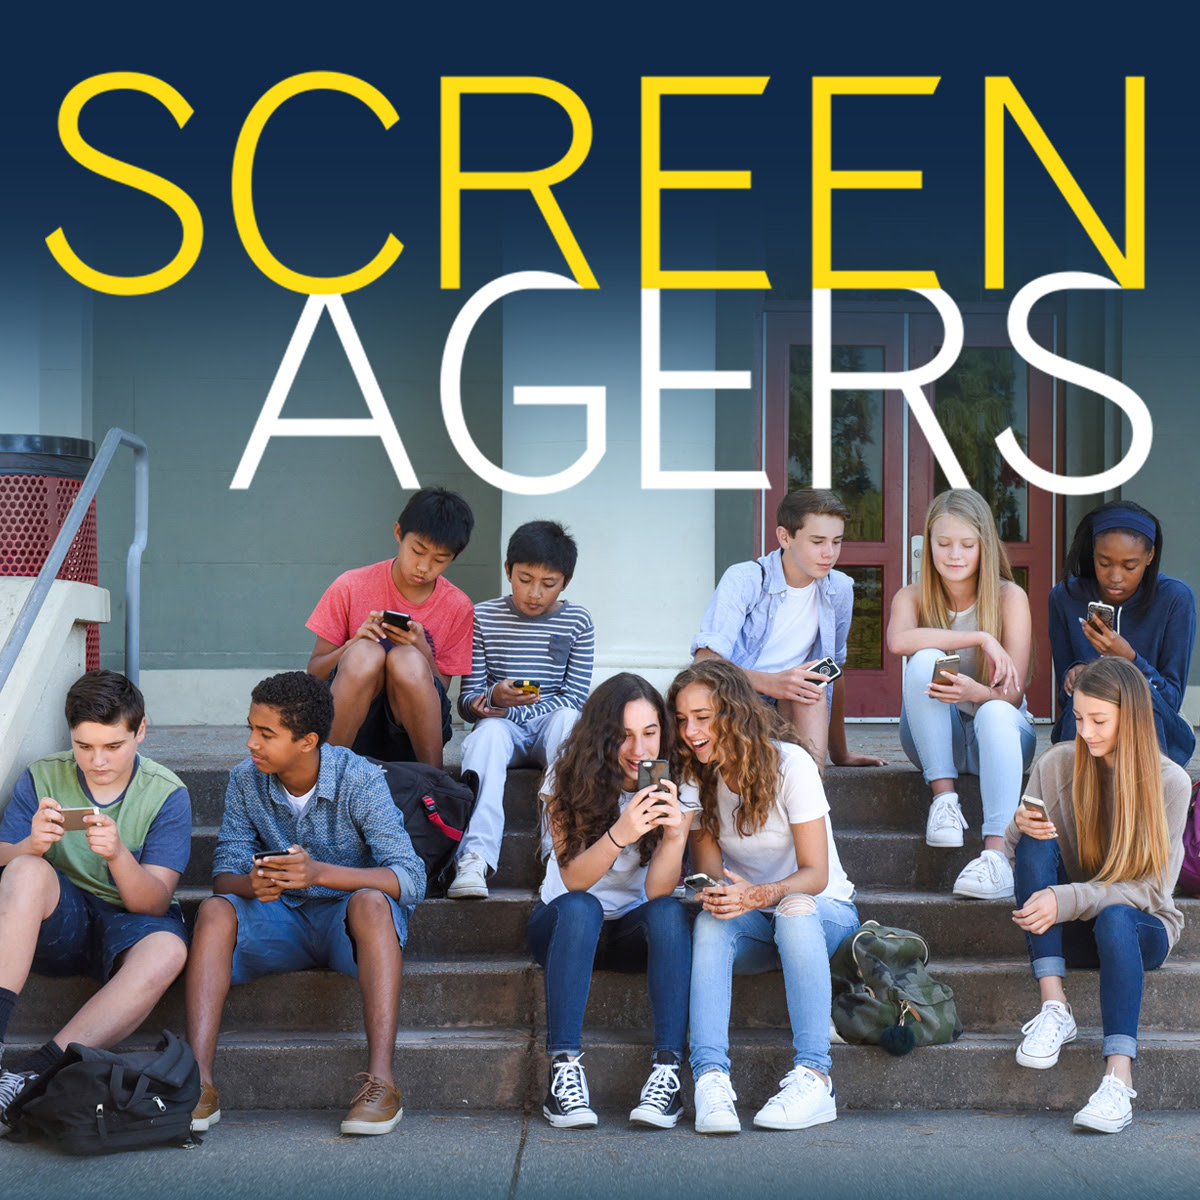 Screenagers Film Presented By MCGT CHOICES Chapter